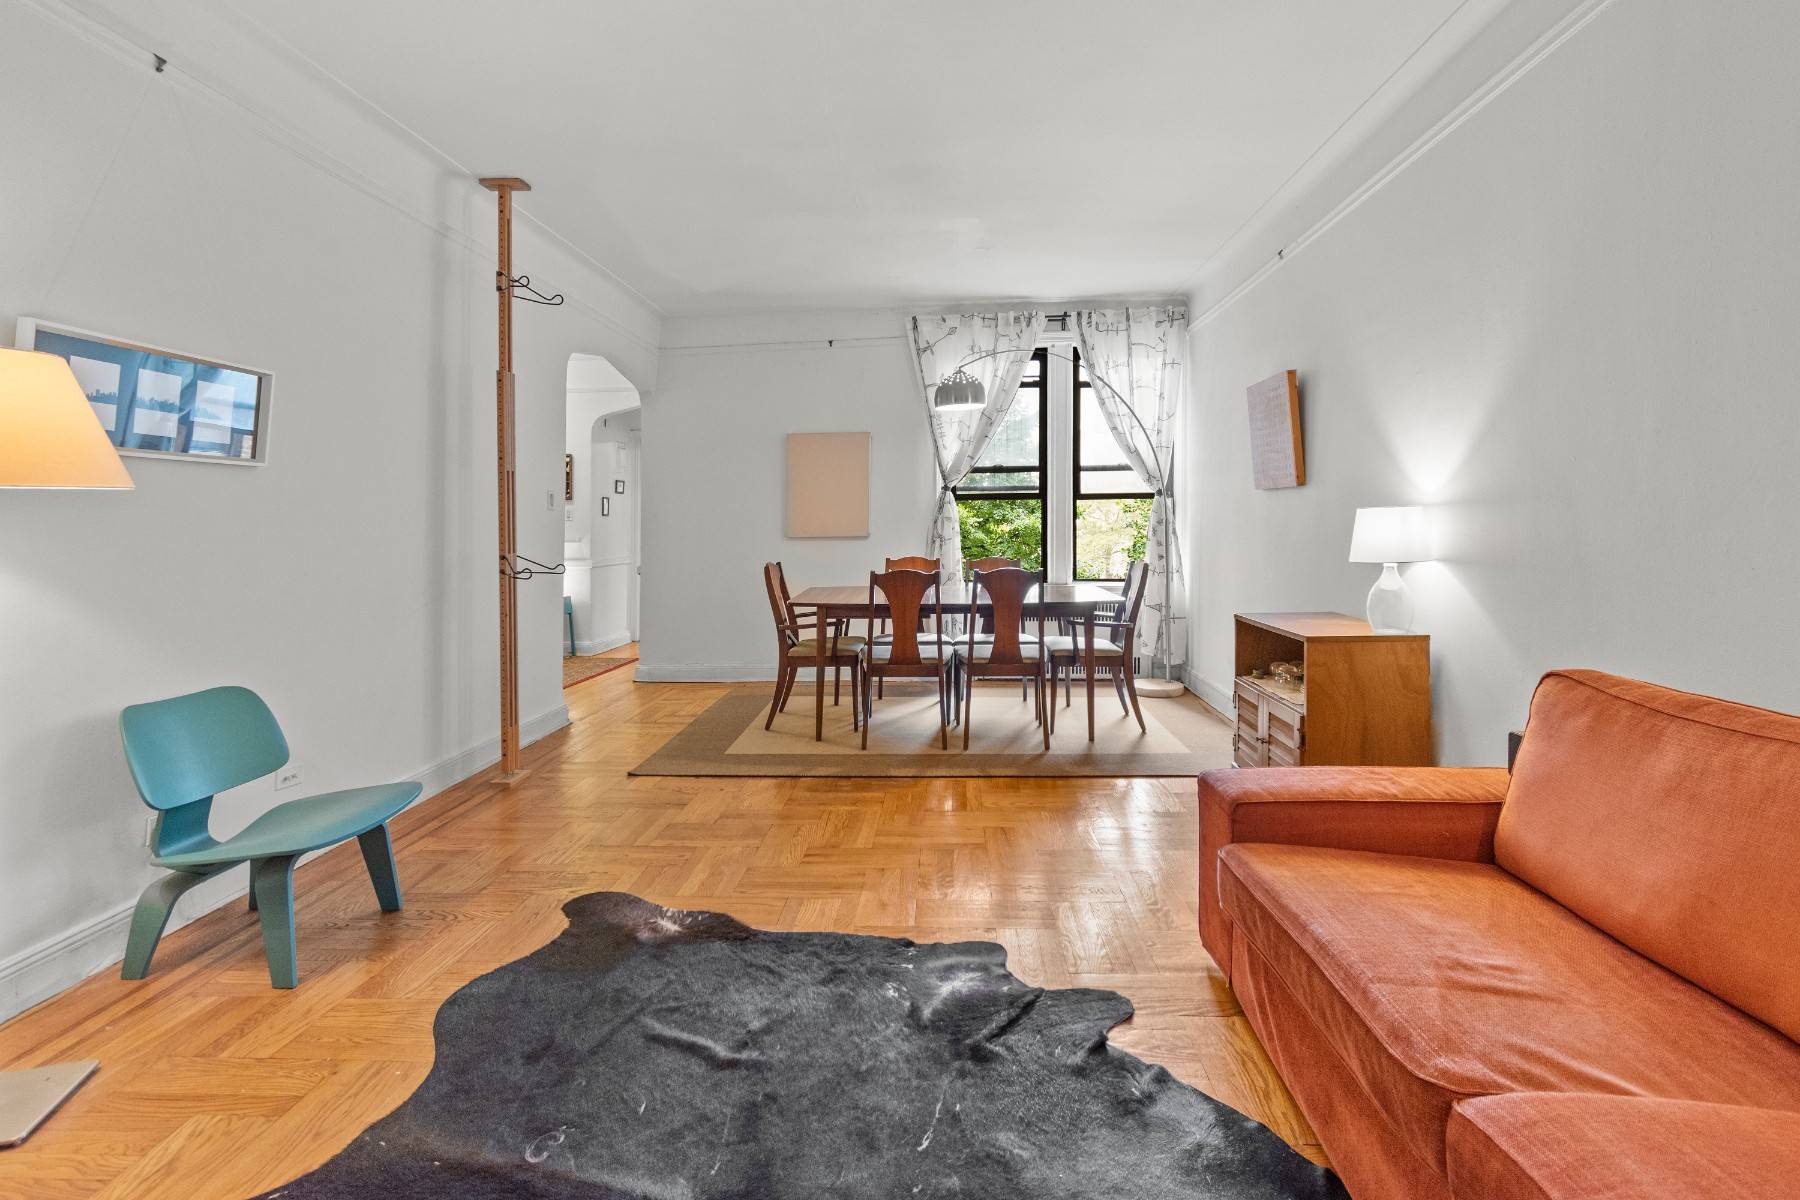 Email for showing appointments Don't miss this rare opportunity to own this bright large one bedroom convertible two bedroom, tucked away on a tree lined block in Windsor Terrace.